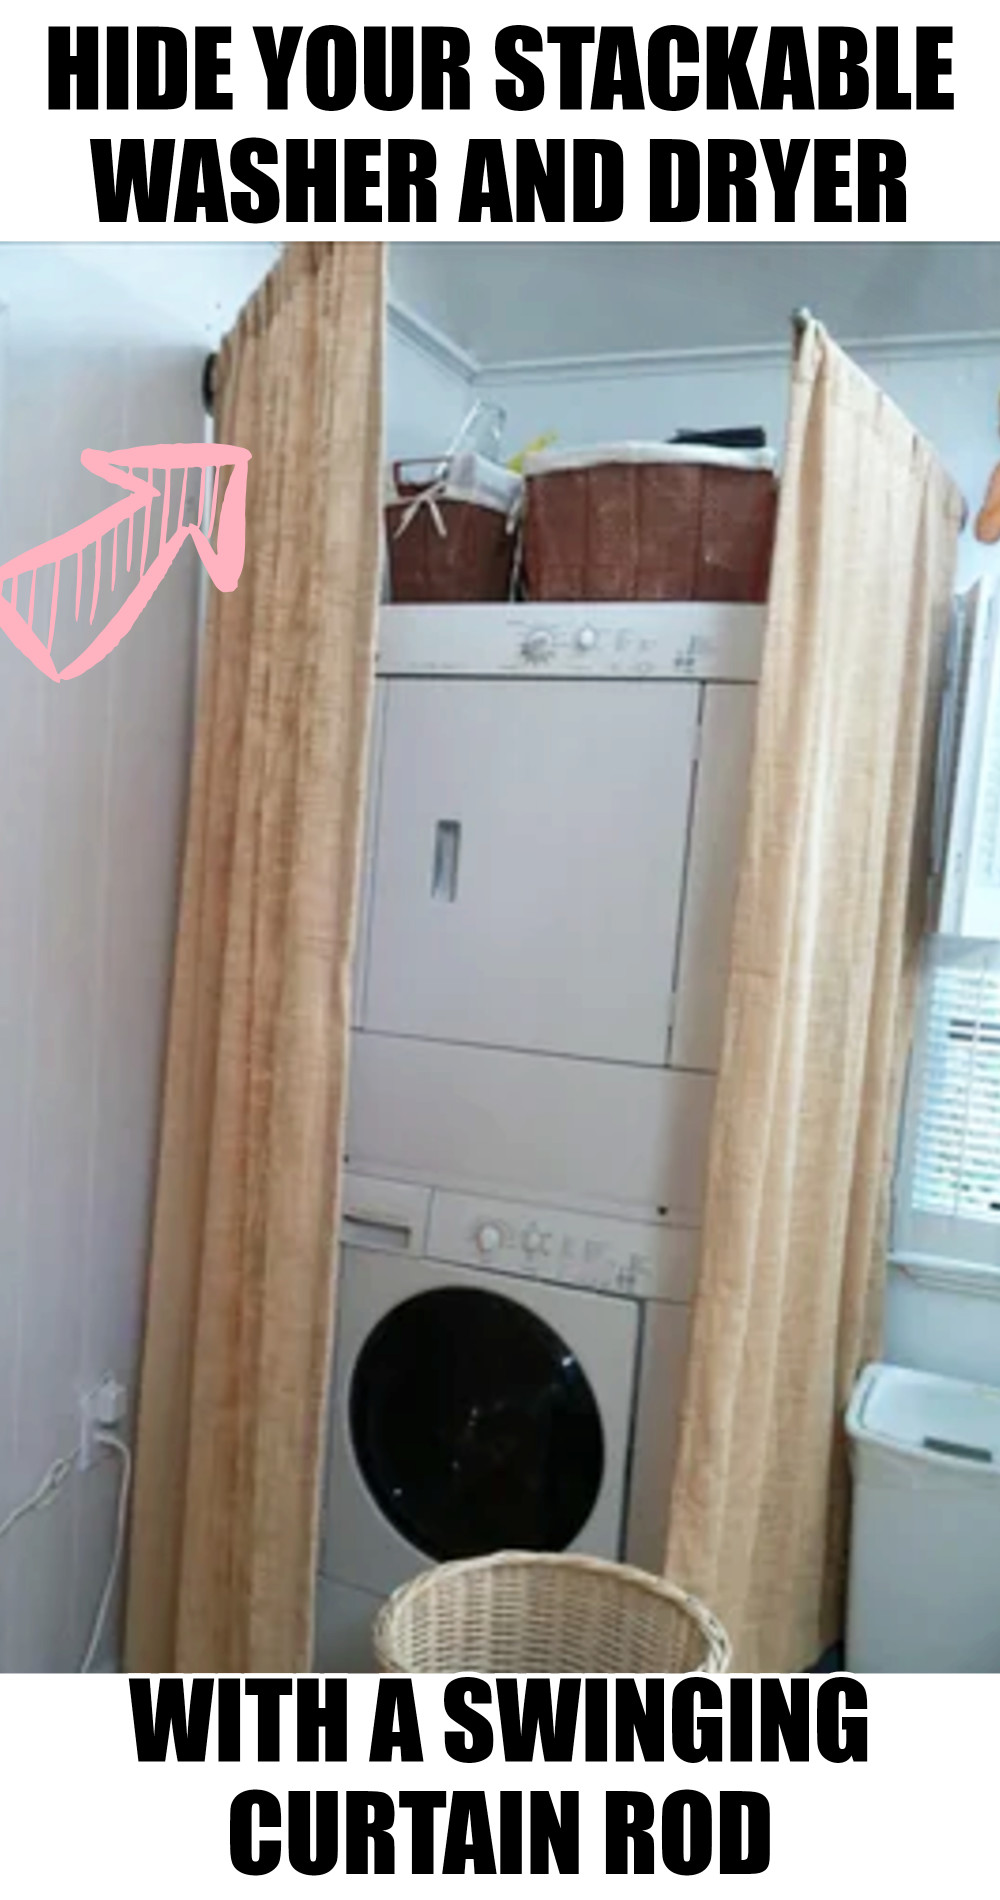 hide stackable washer and dryer with swinging curtain rod